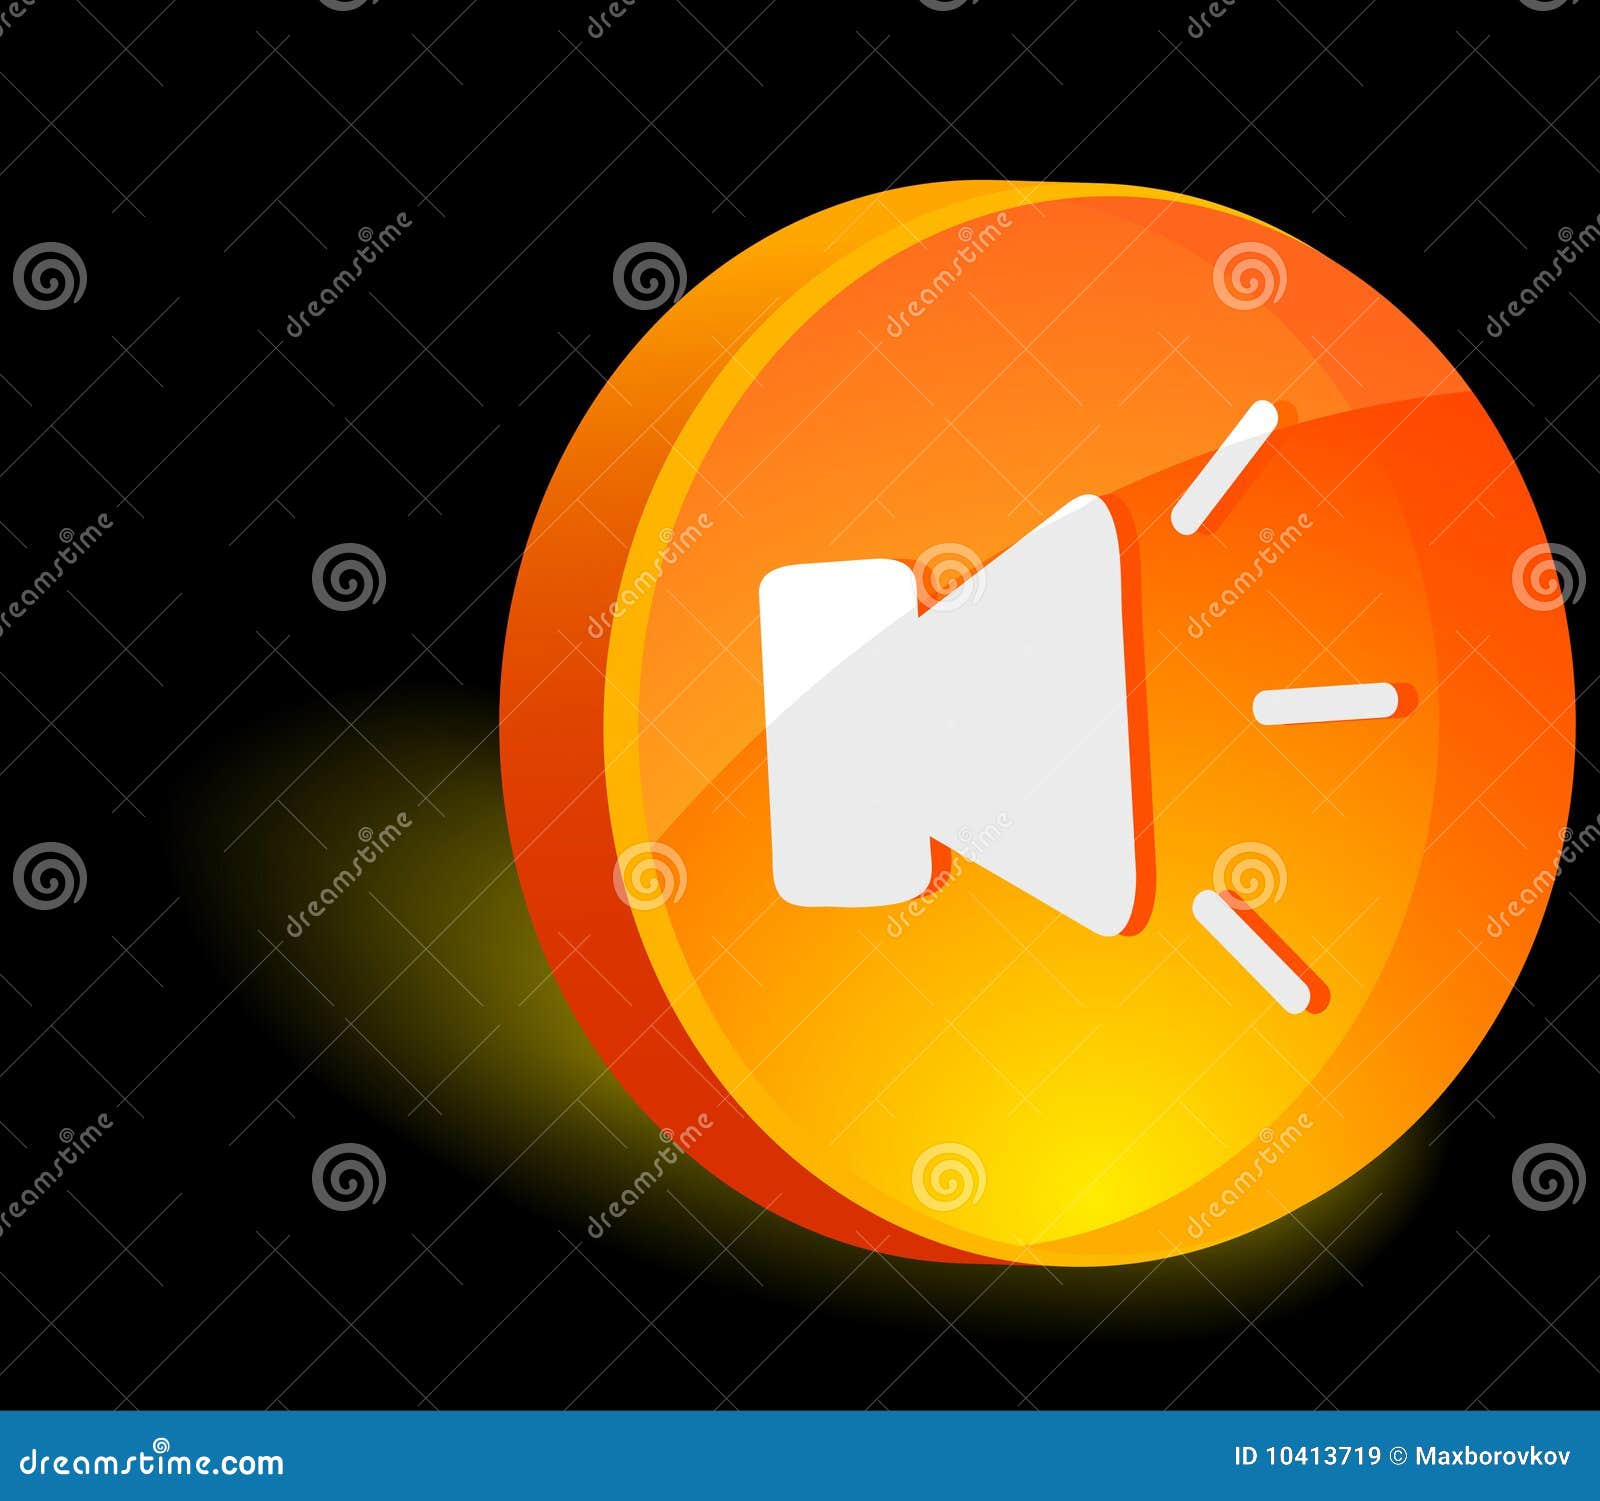 Sound Icon. Royalty Free Stock Images - Image: 10413719